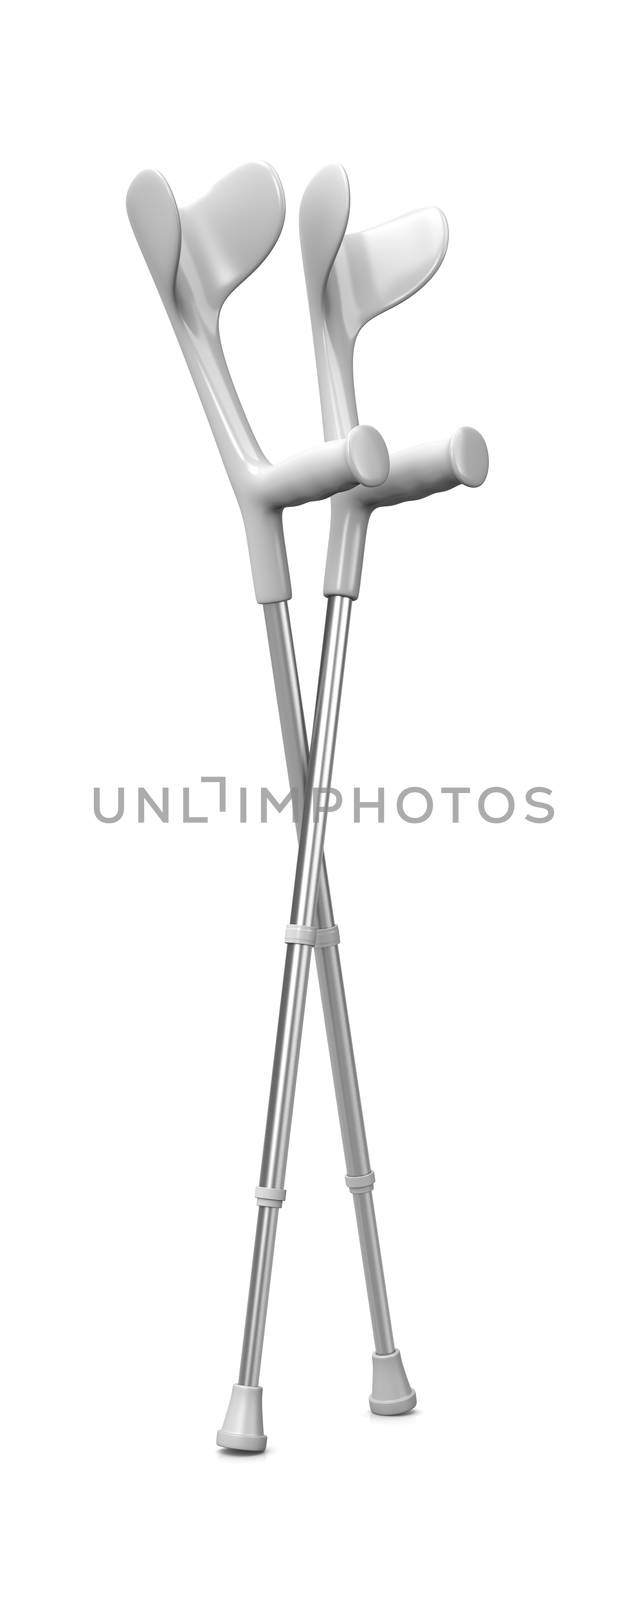 Crutches on White by make